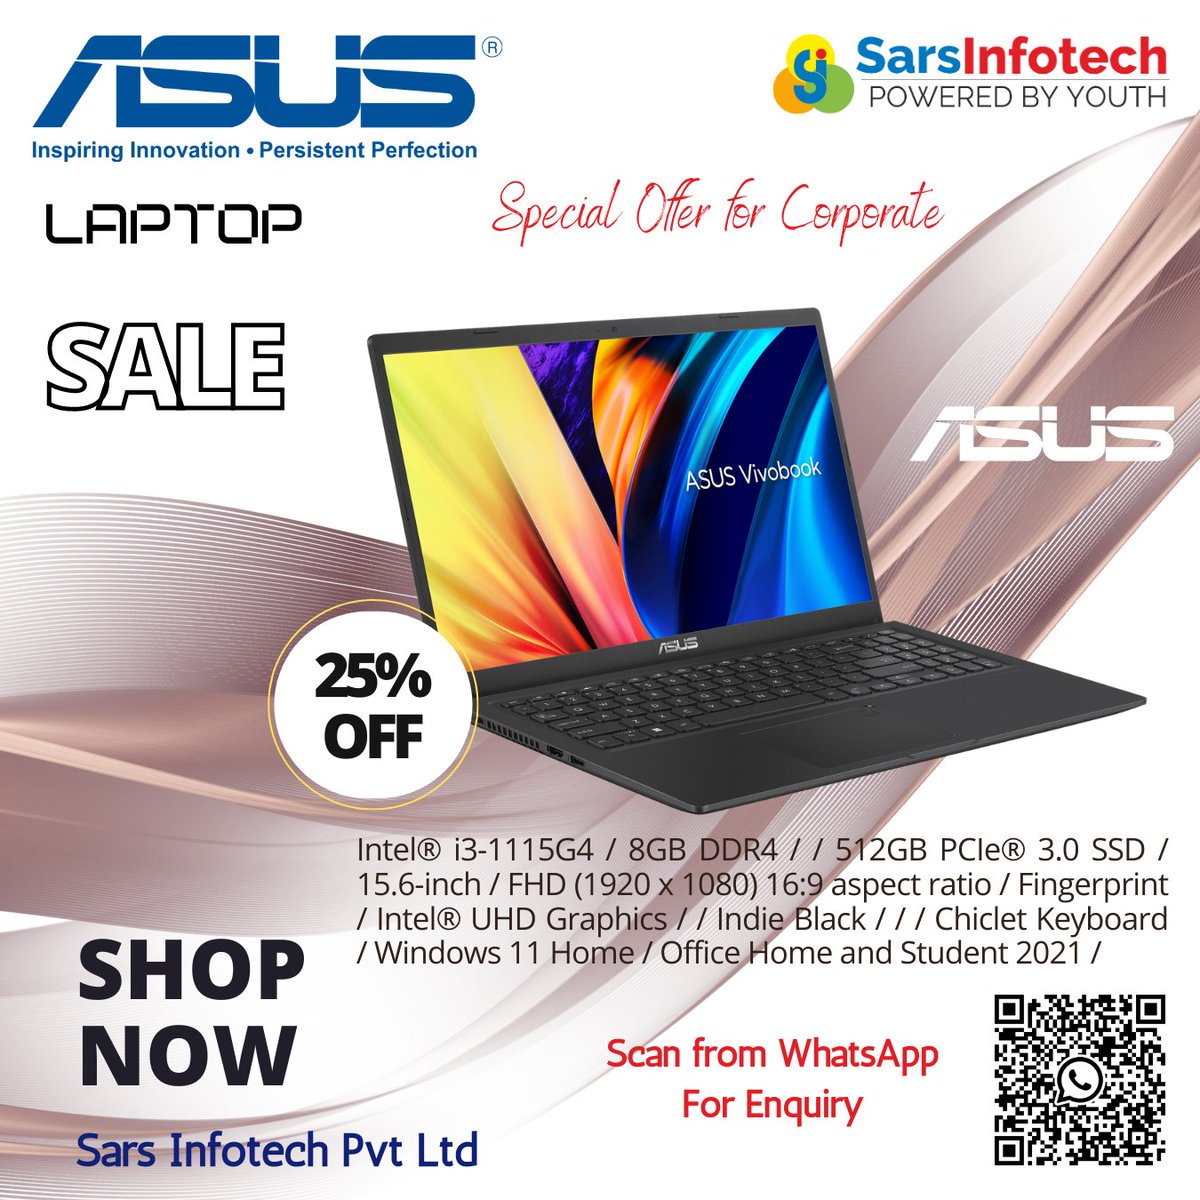 Upgrade your tech game with unbeatable deals on #Asus laptops! Don't miss out on the opportunity to elevate your productivity and performance.
#laptop #offer #workfromanywhere #desktop #bestoffers #opportunity #tech #productivity